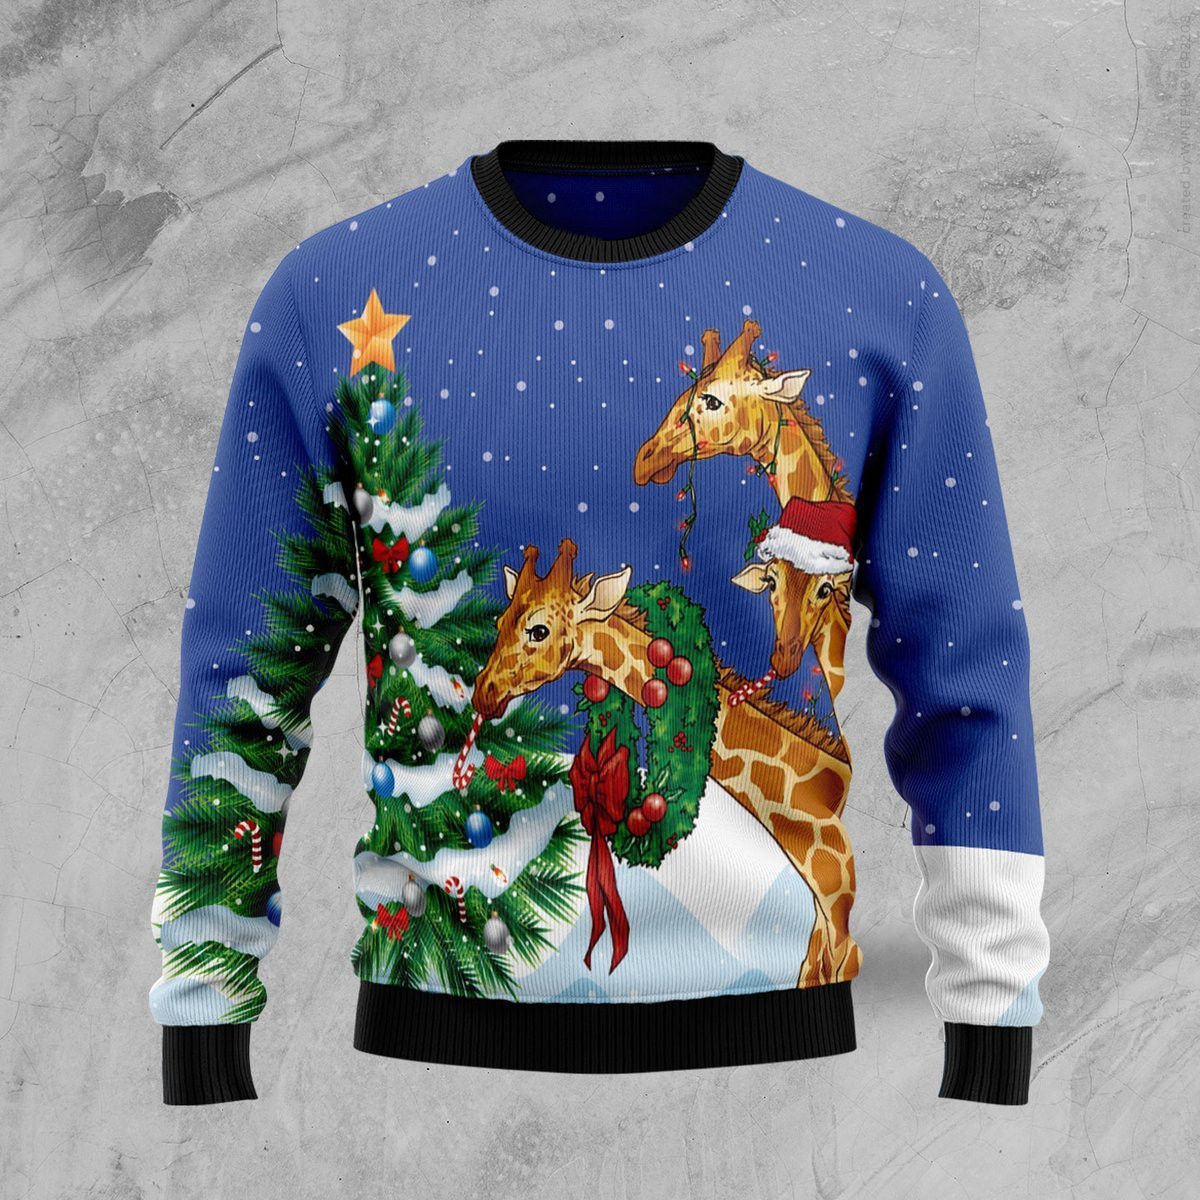 Giraffe Family Xmas Ugly Christmas Sweater Ugly Sweater For Men Women, Holiday Sweater